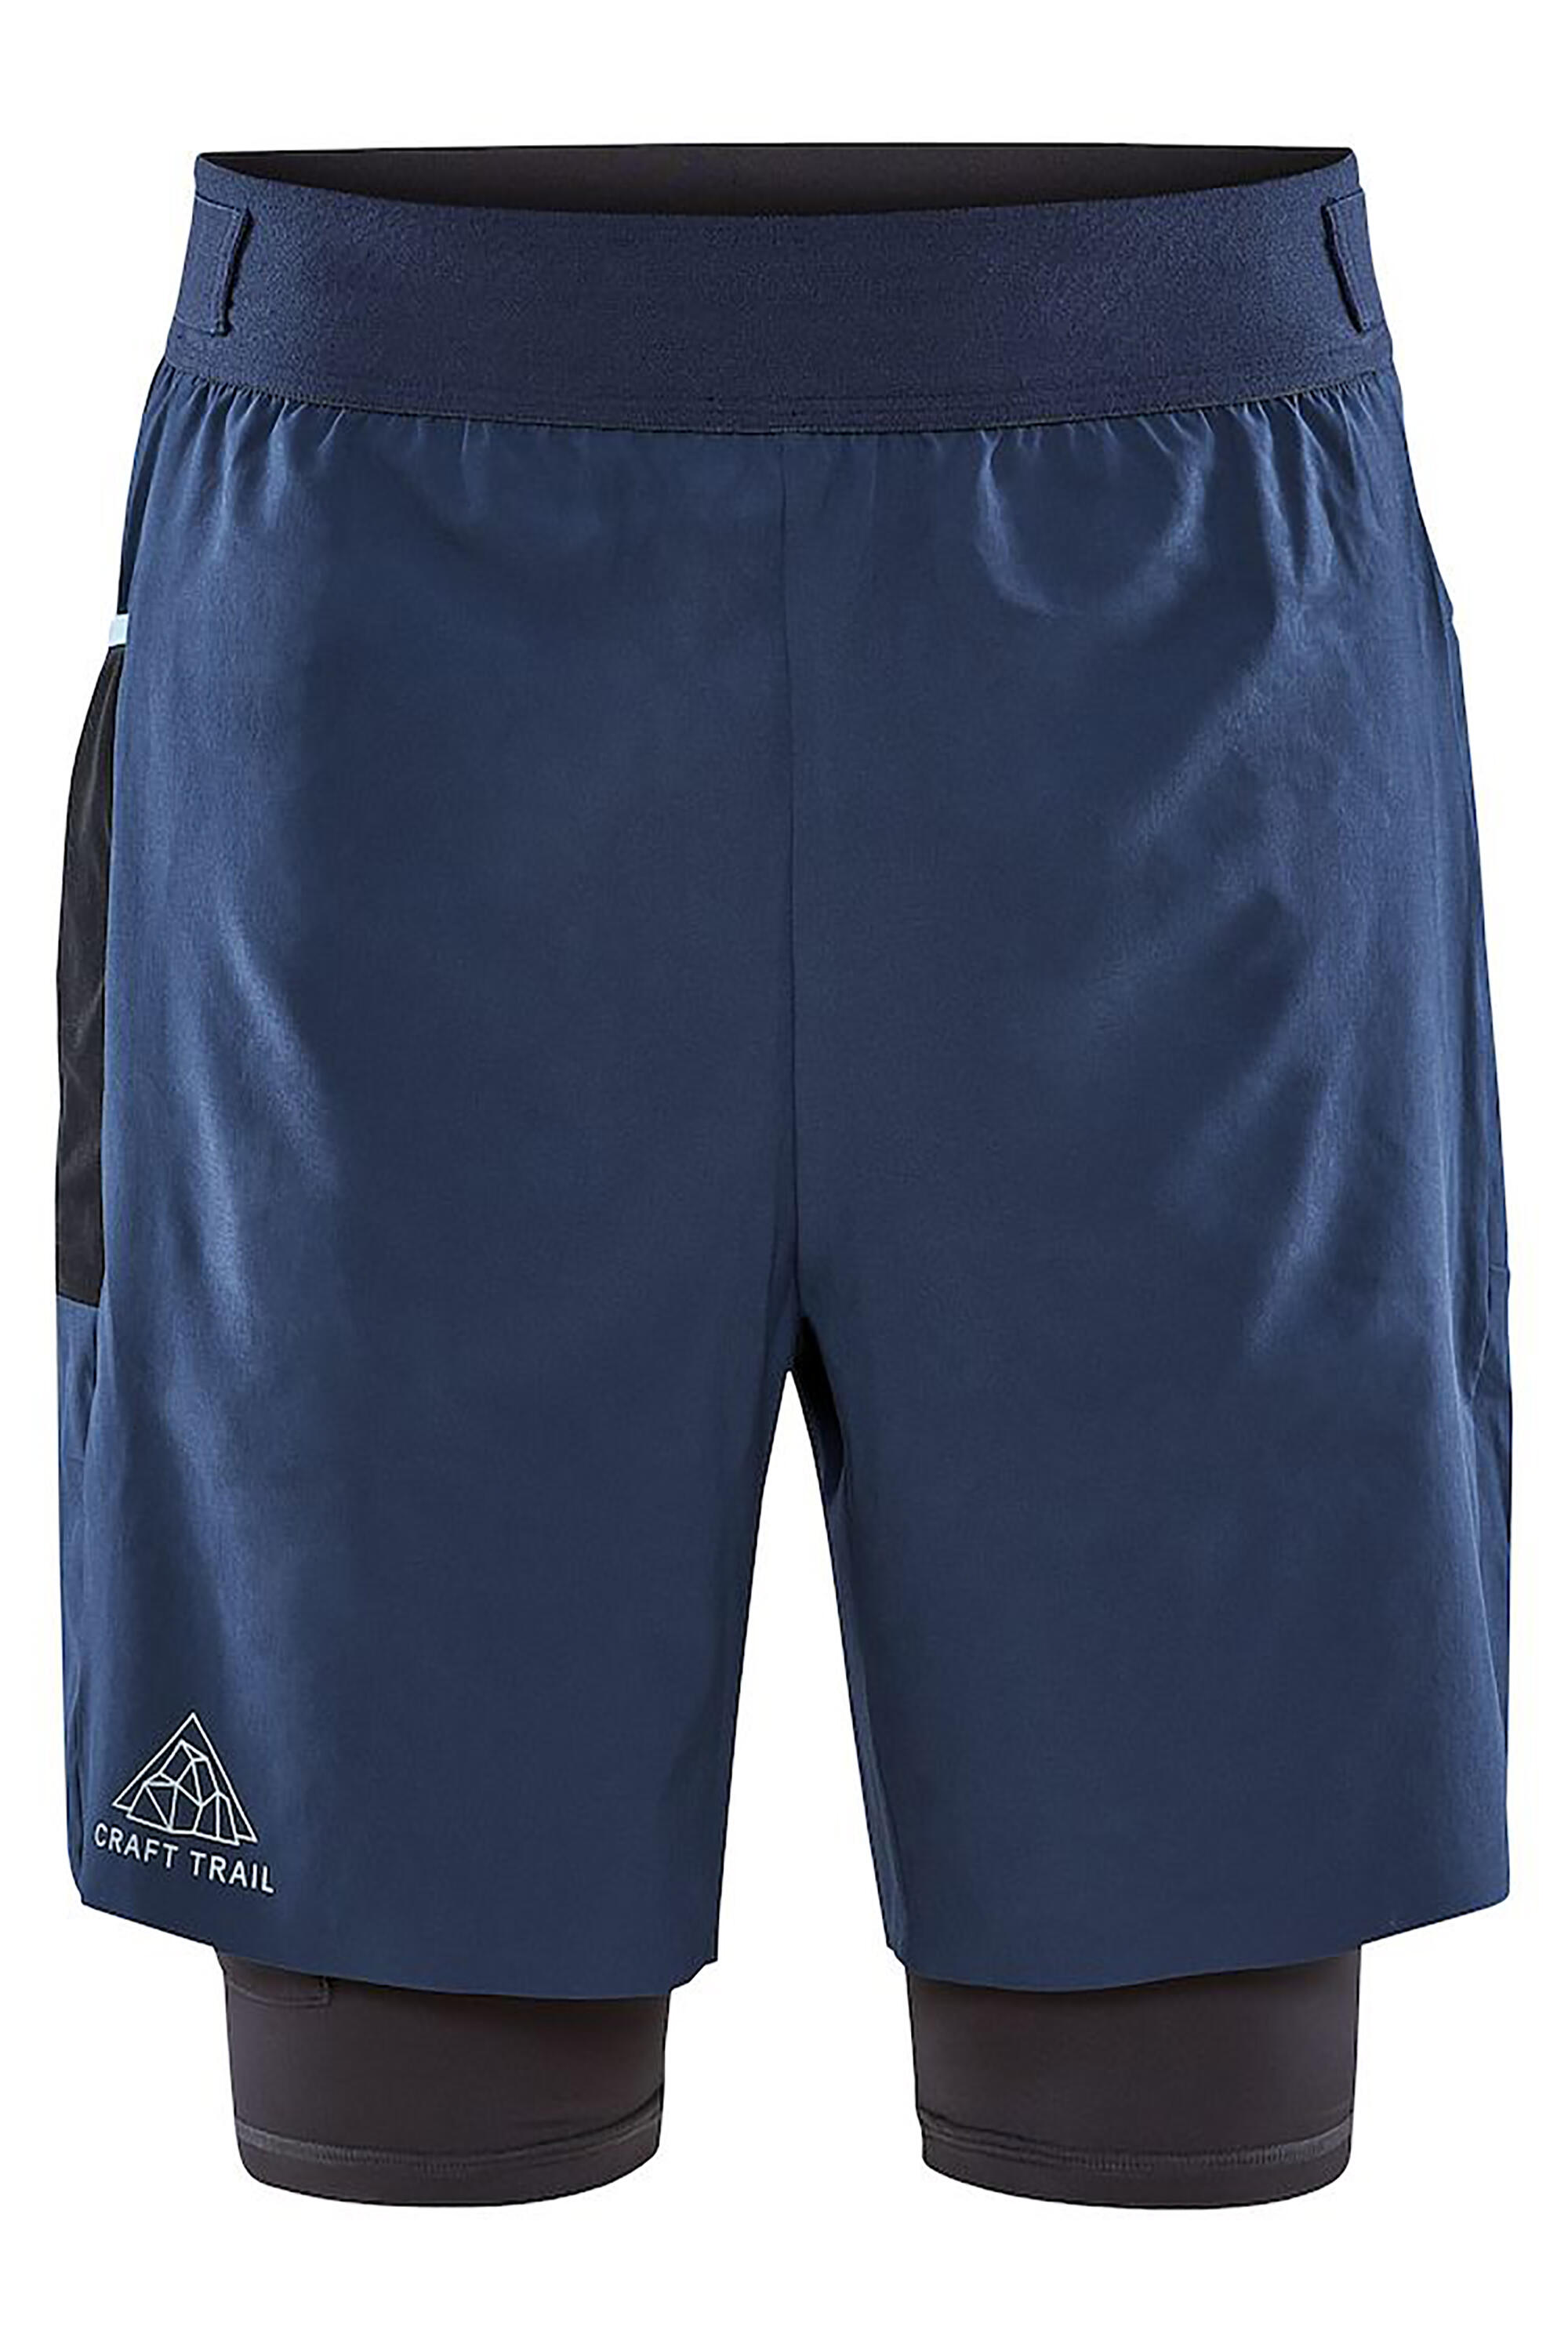 CRAFT Pro Trail 2in1 Shorts Men